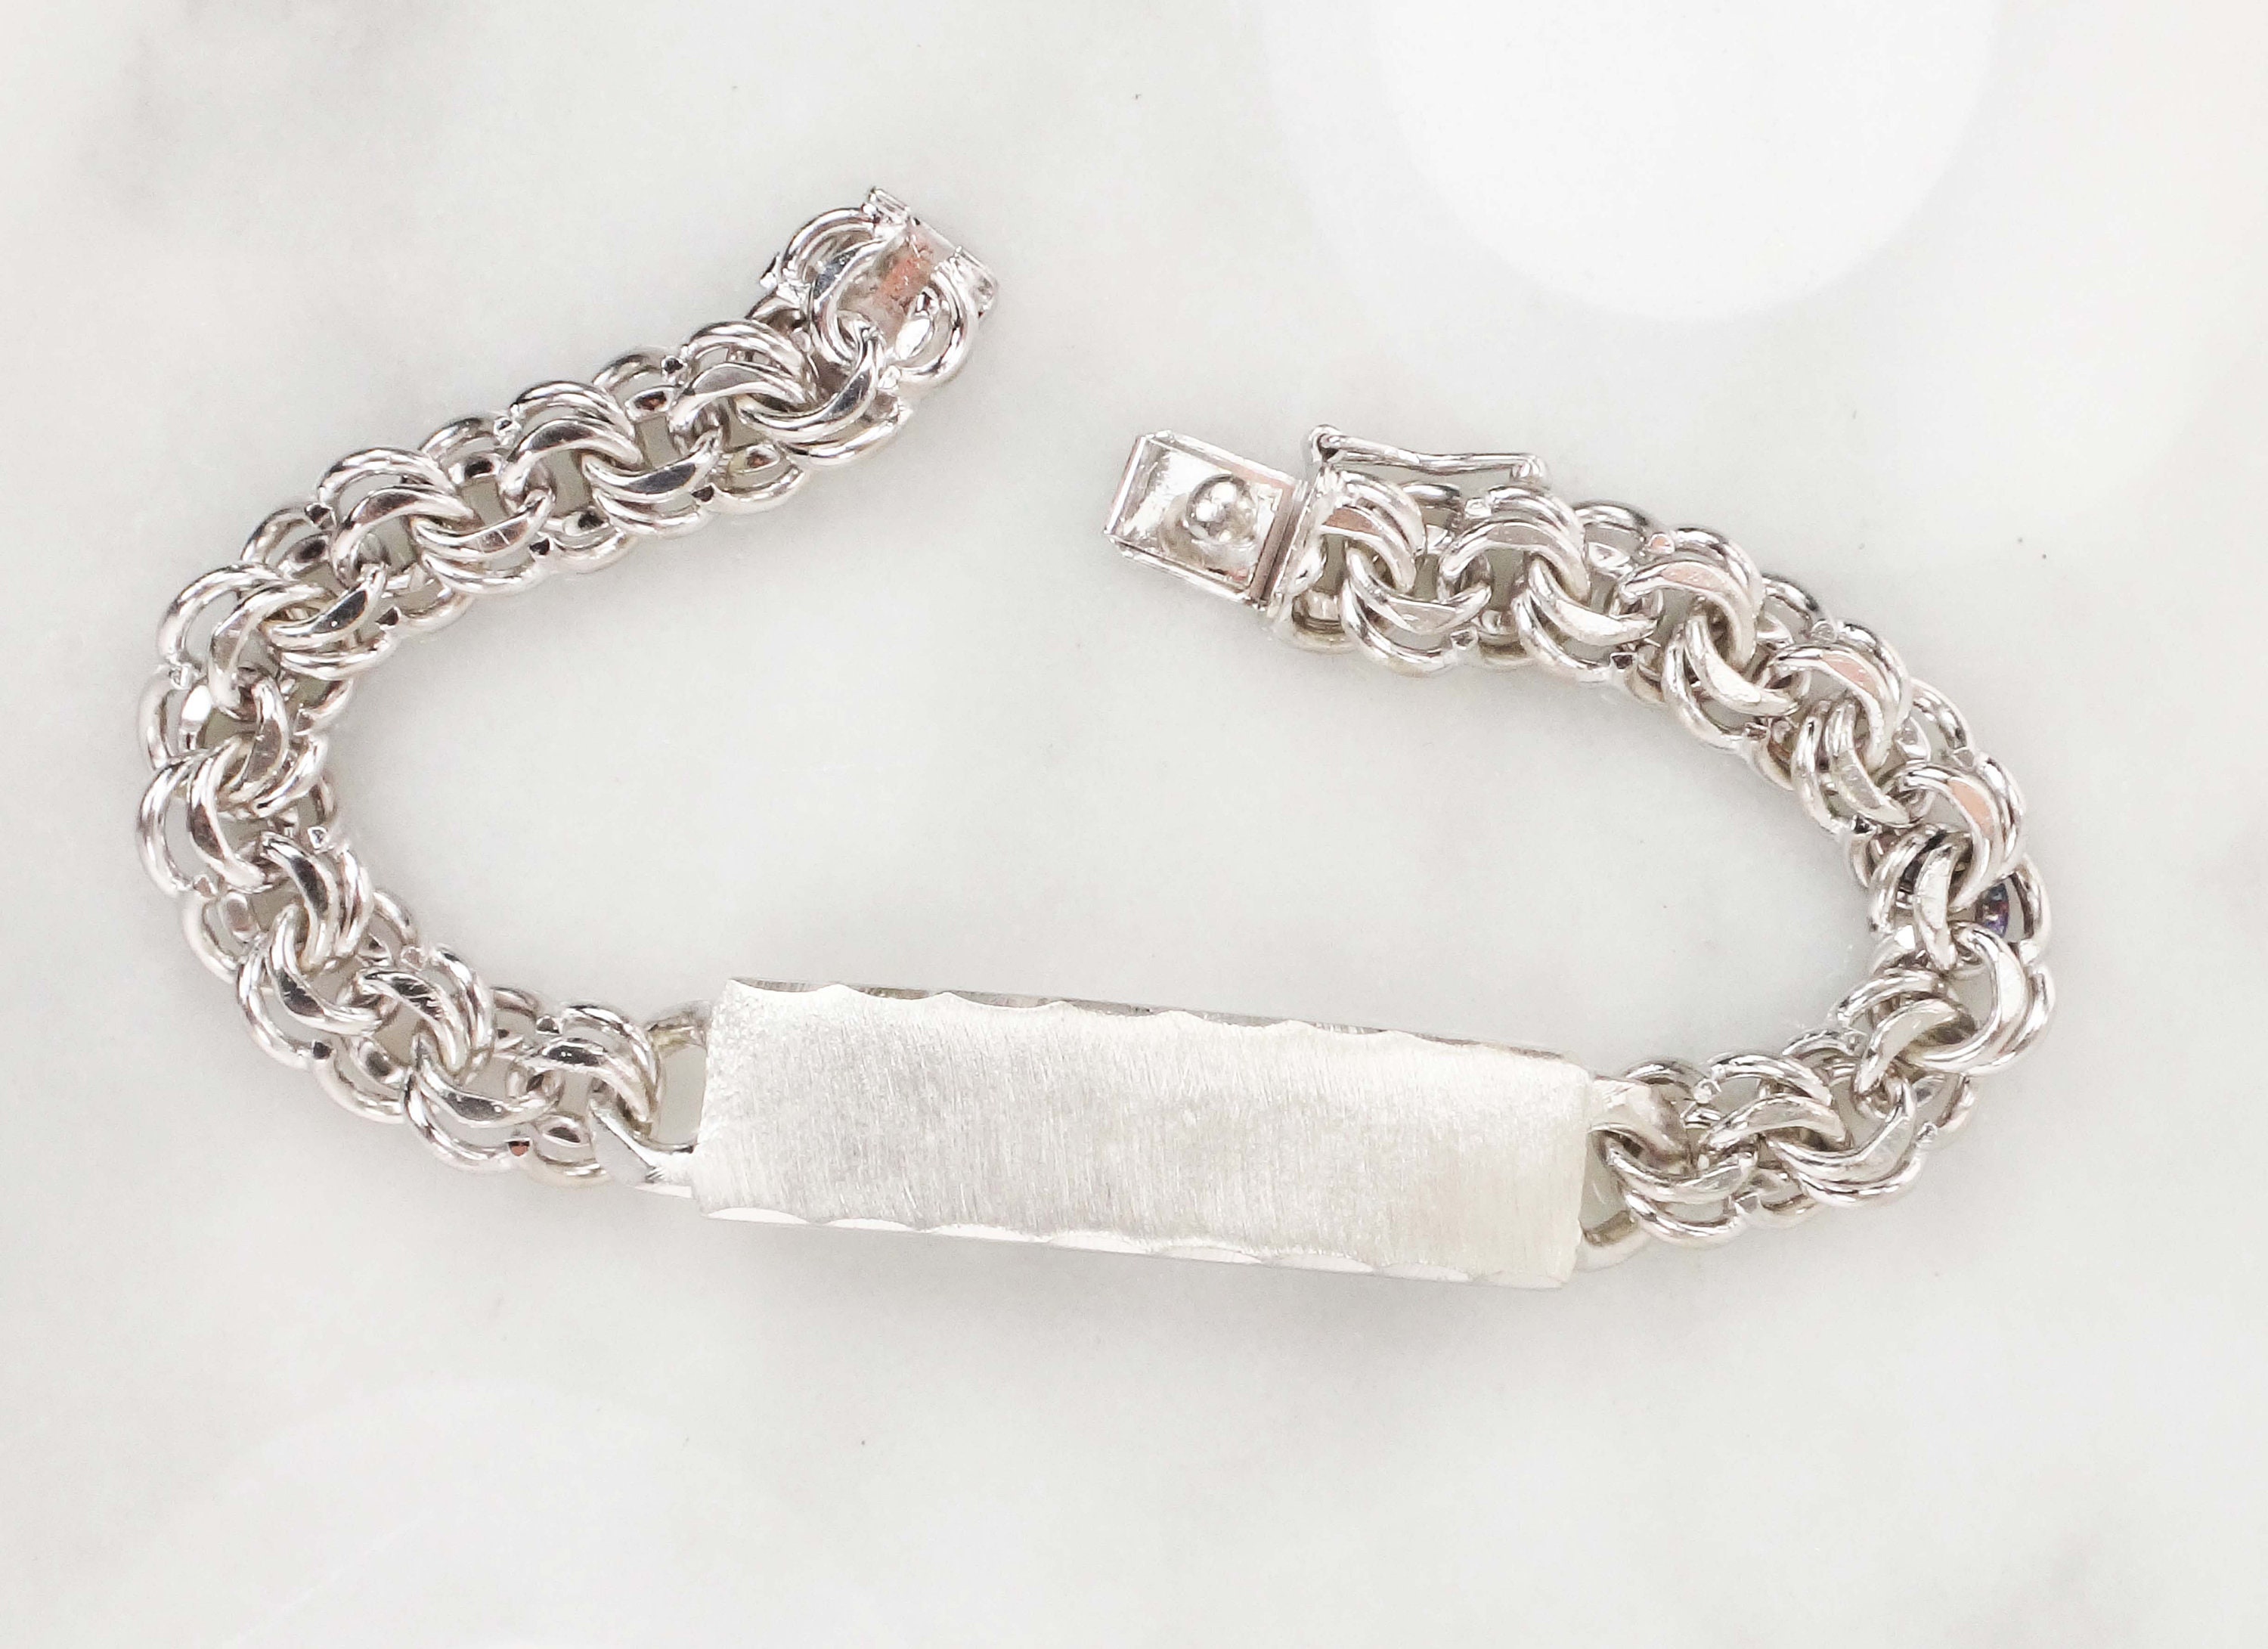 Antique Silver Link Rustic Cuff Bracelets For Men Retro Punk Style,  Handsome Personality, Perfect Birthday Or Party Gift From Dryback, $10.65 |  DHgate.Com